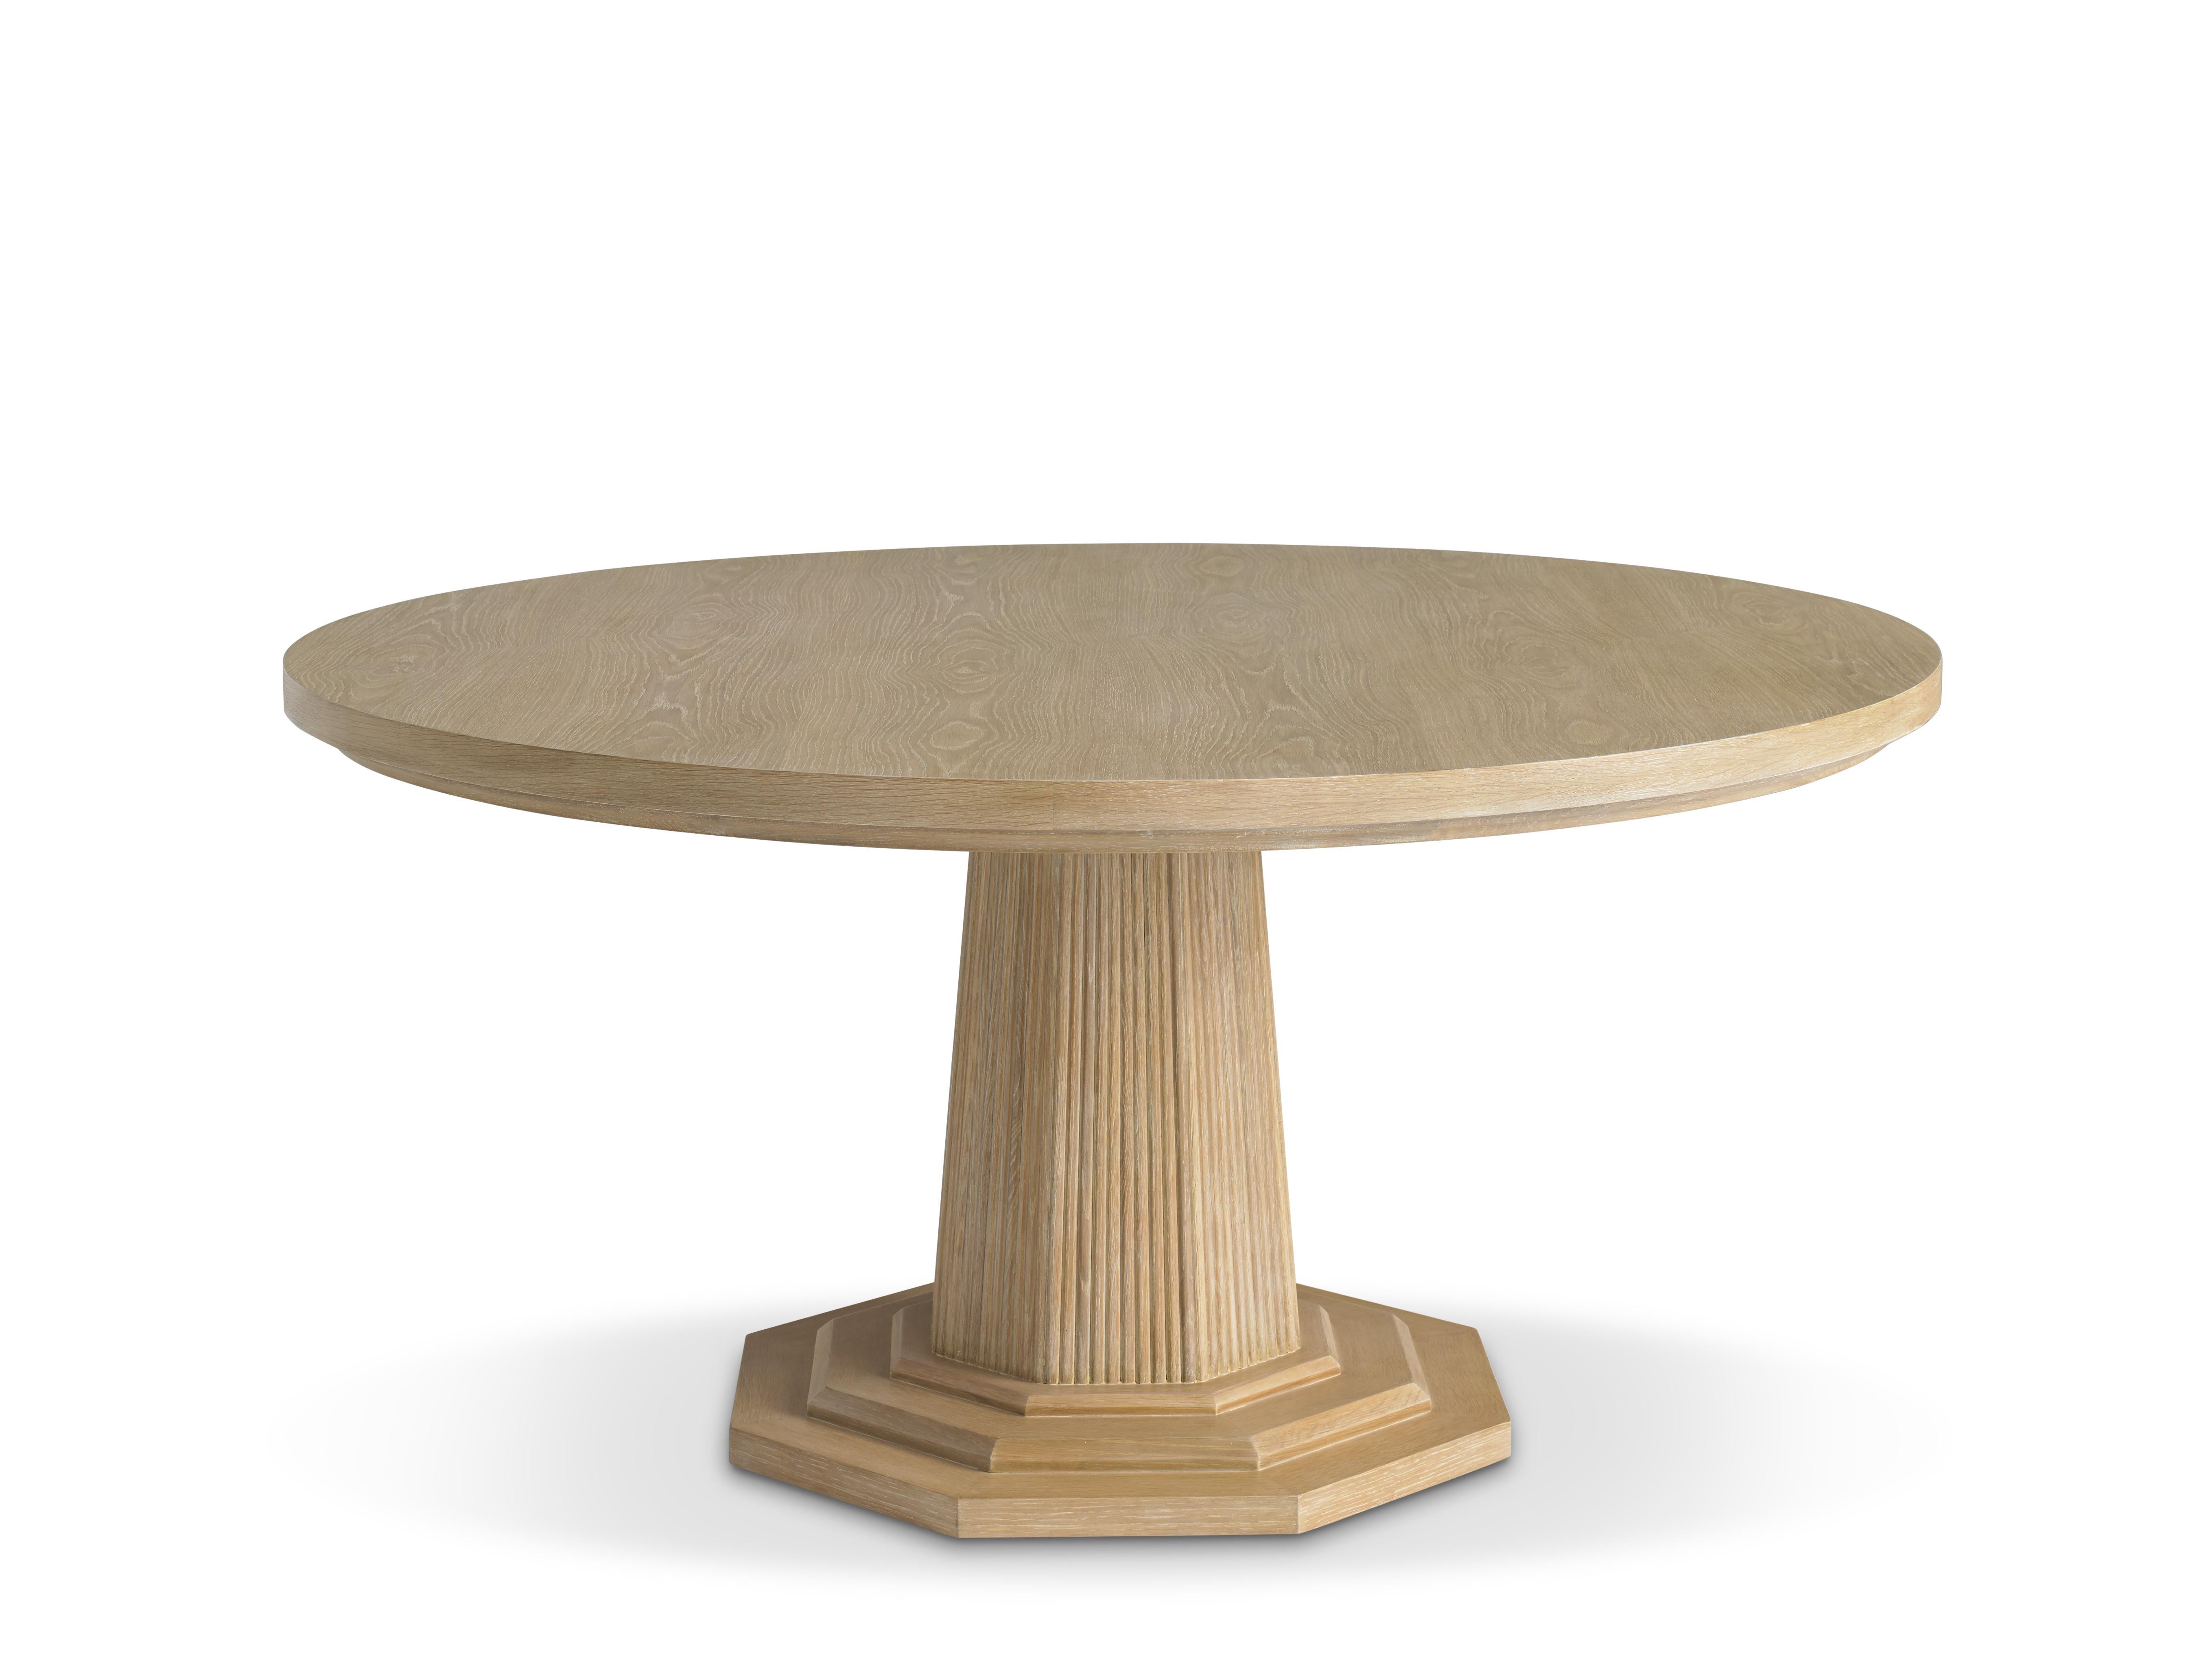 This large-scale 60” diameter dining table has a top and base finished in cerused oak. The pedestal base is reeded and octagonal in shape. This piece is made for people to live around - it anchors a room and will comfortably seat a houseful of